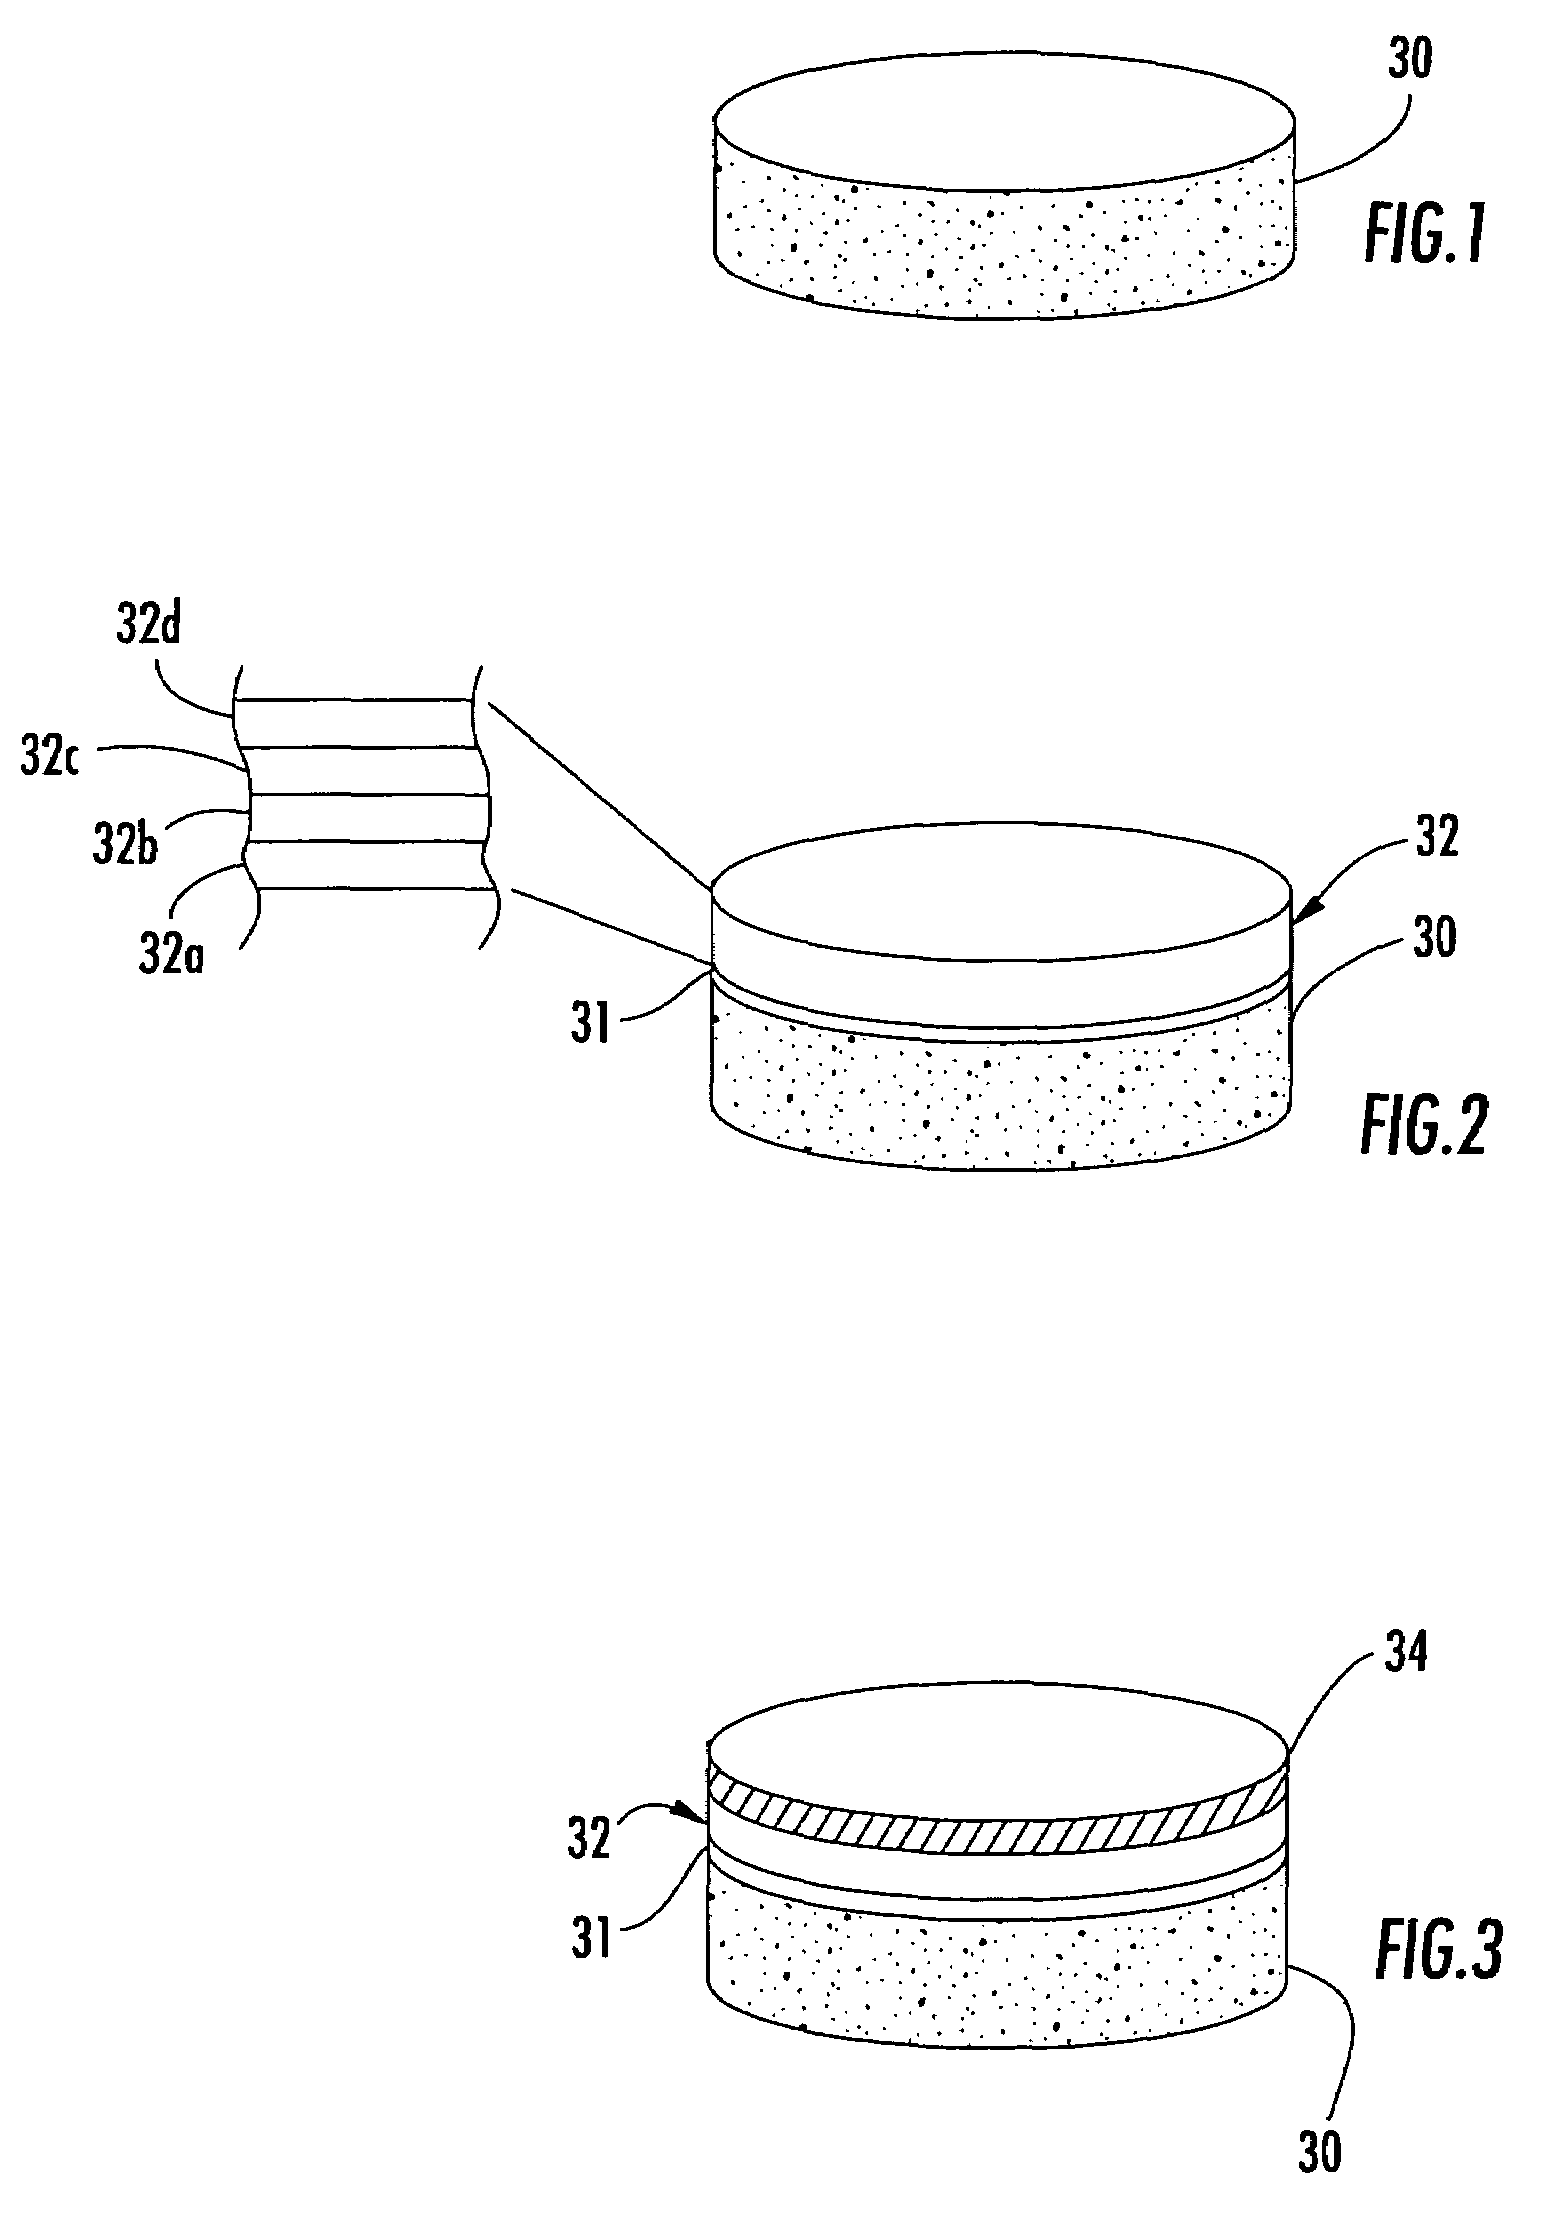 Method for making Group III nitride devices and devices produced thereby